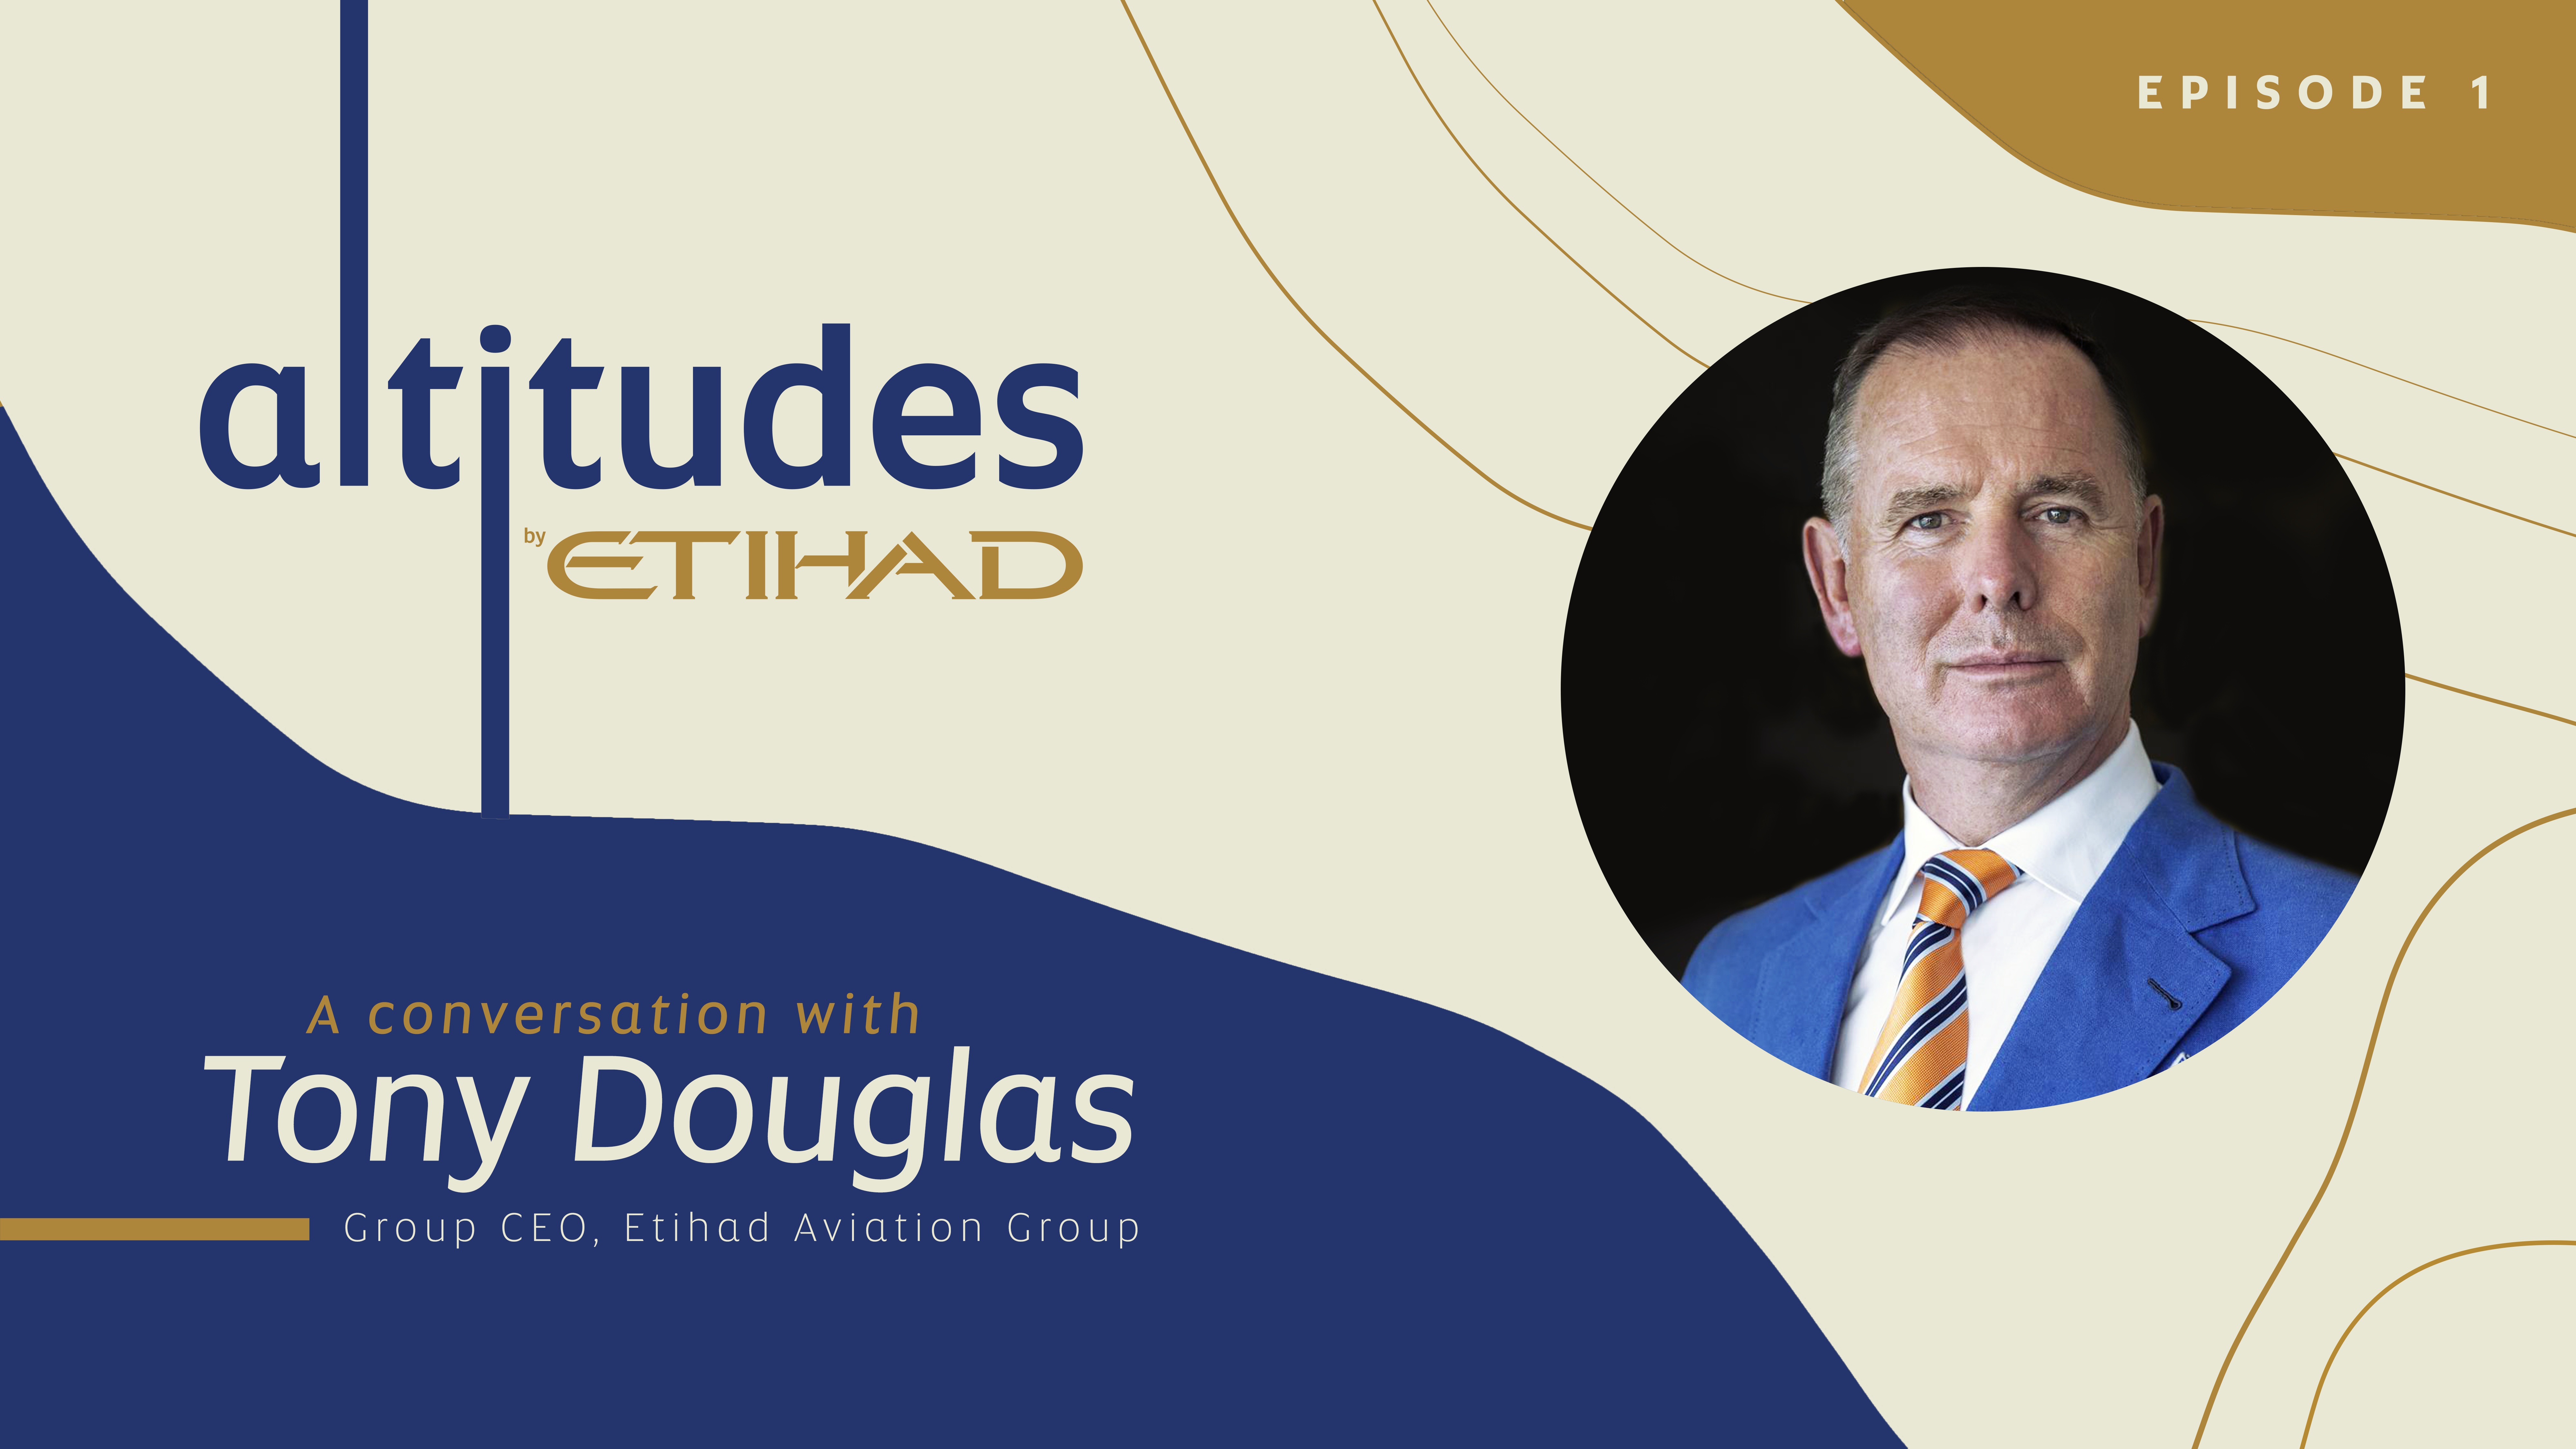 Etihad Airways Launches ‘Altitudes By Etihad’ Podcast Series Touching On The Industry’s Hottest Topics